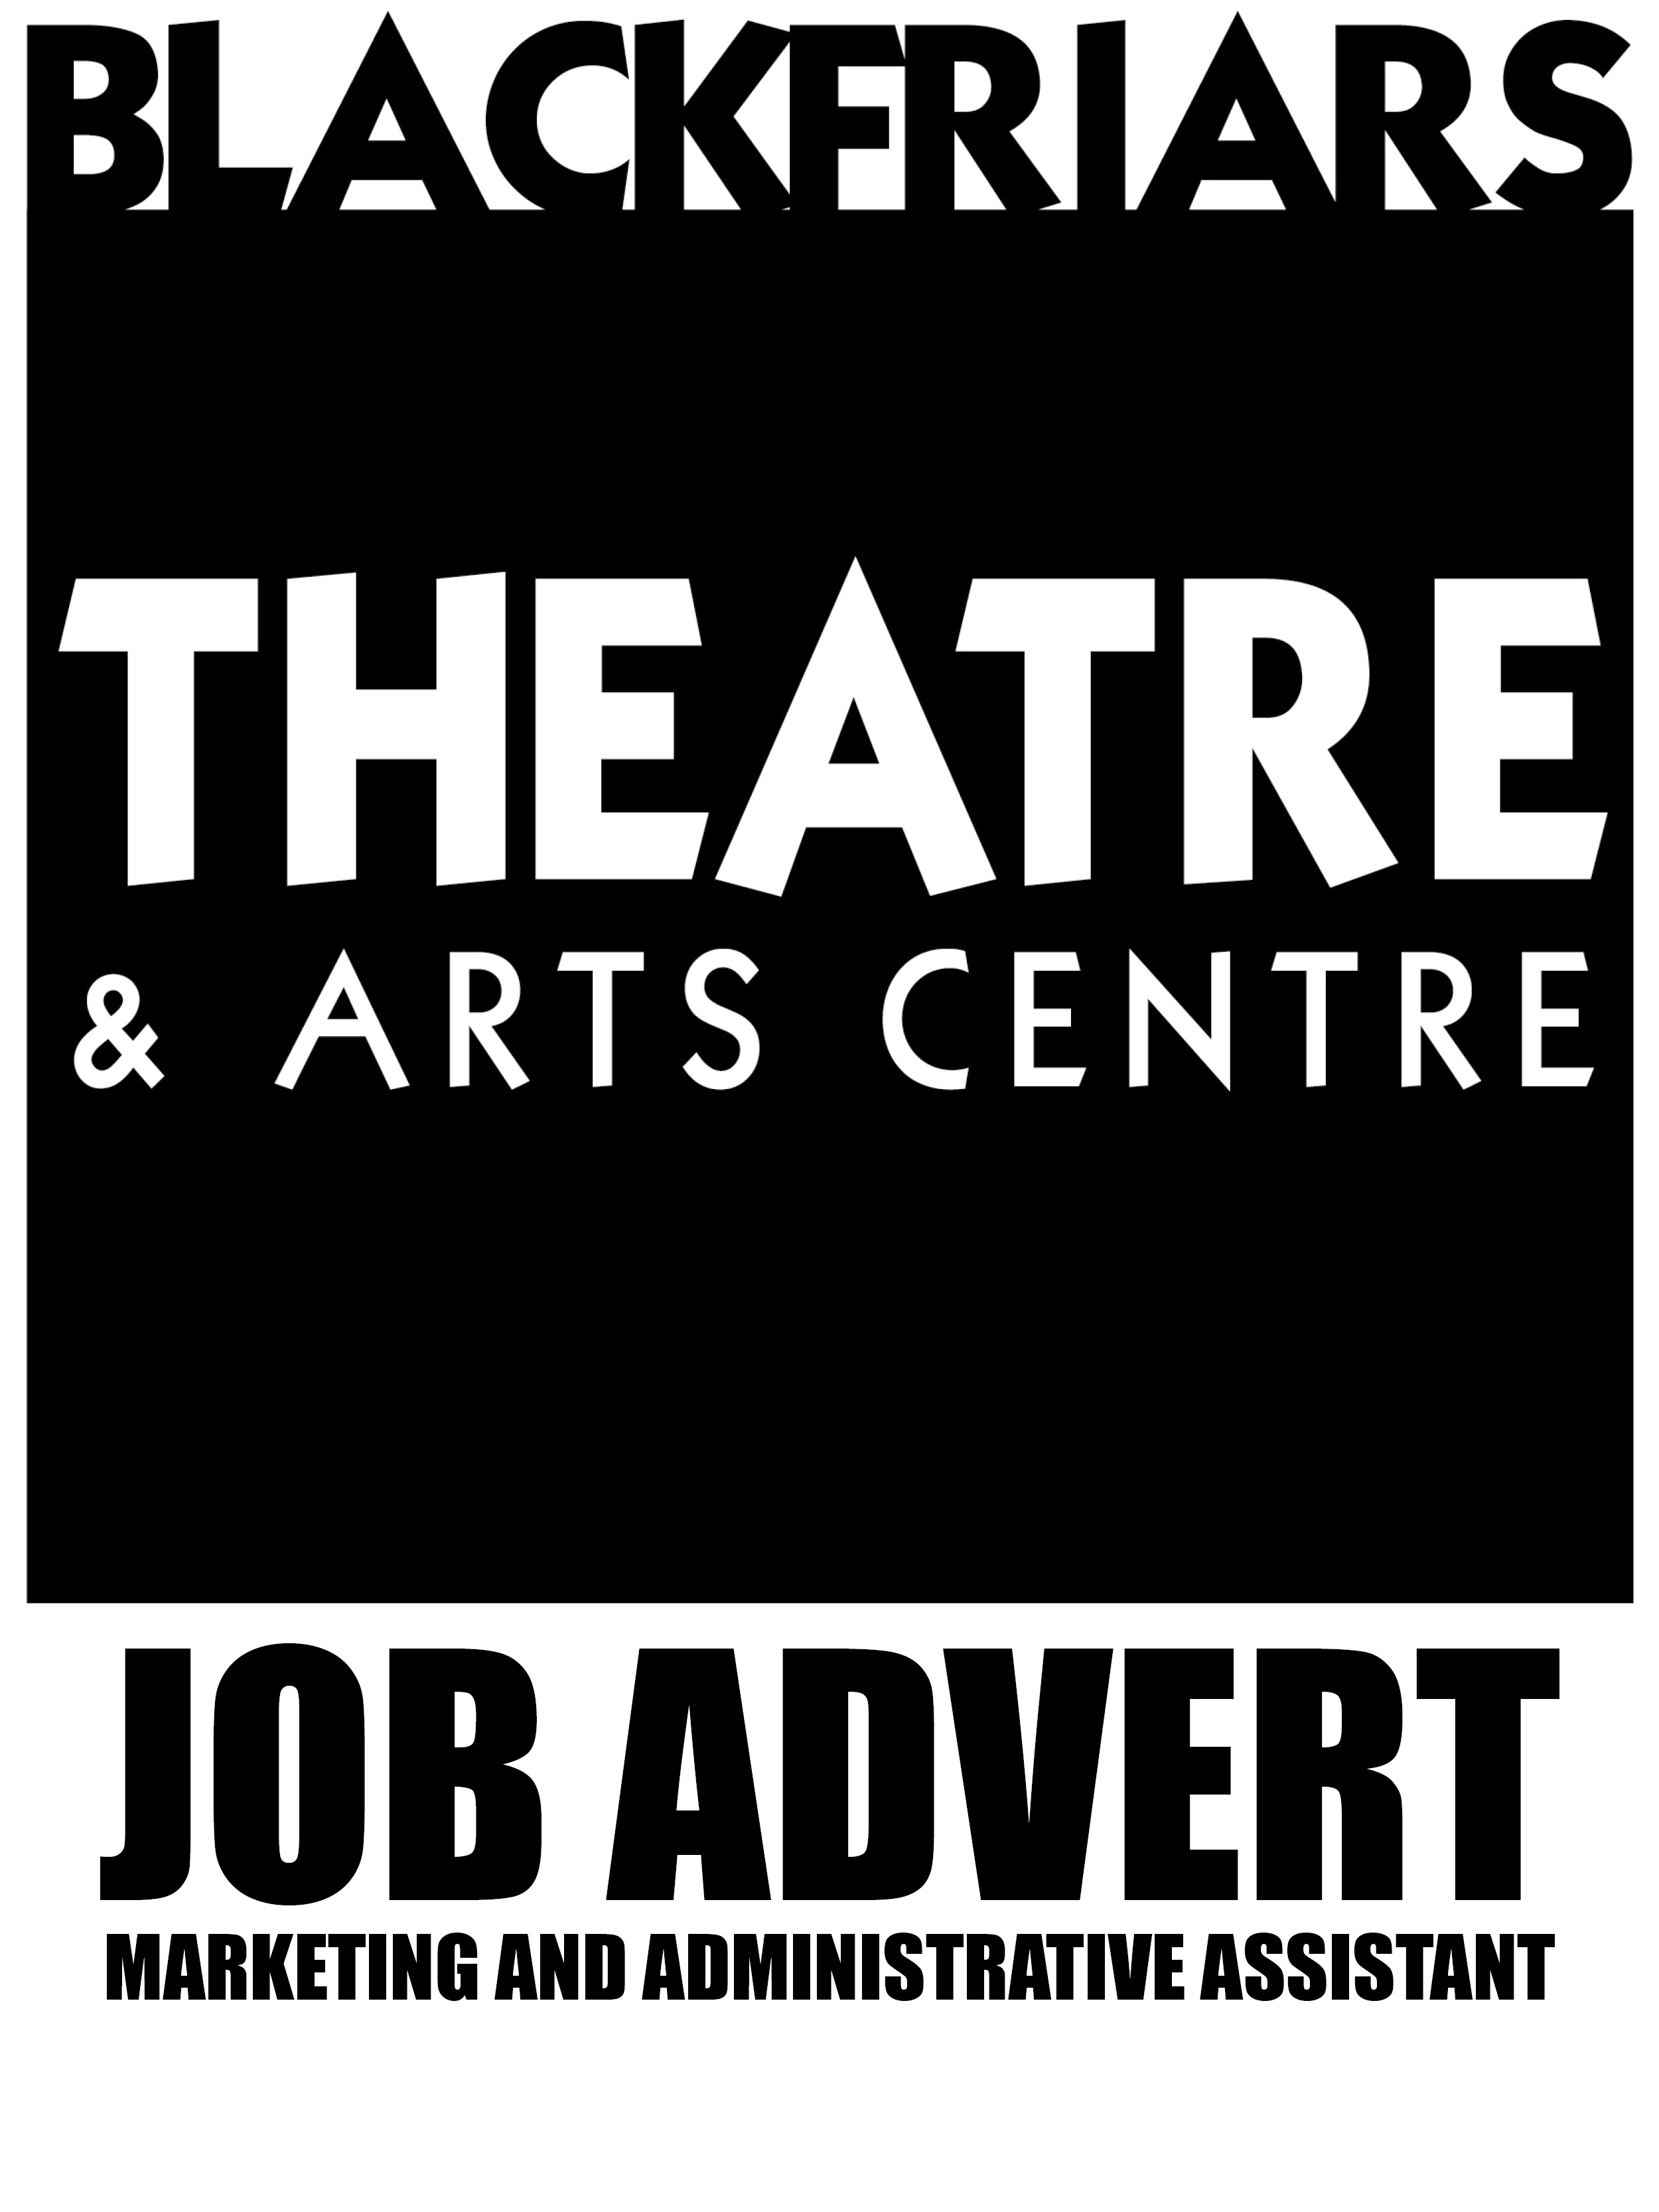 Blackfriars Theatre are recruiting - Marketing and Administrative Assistant